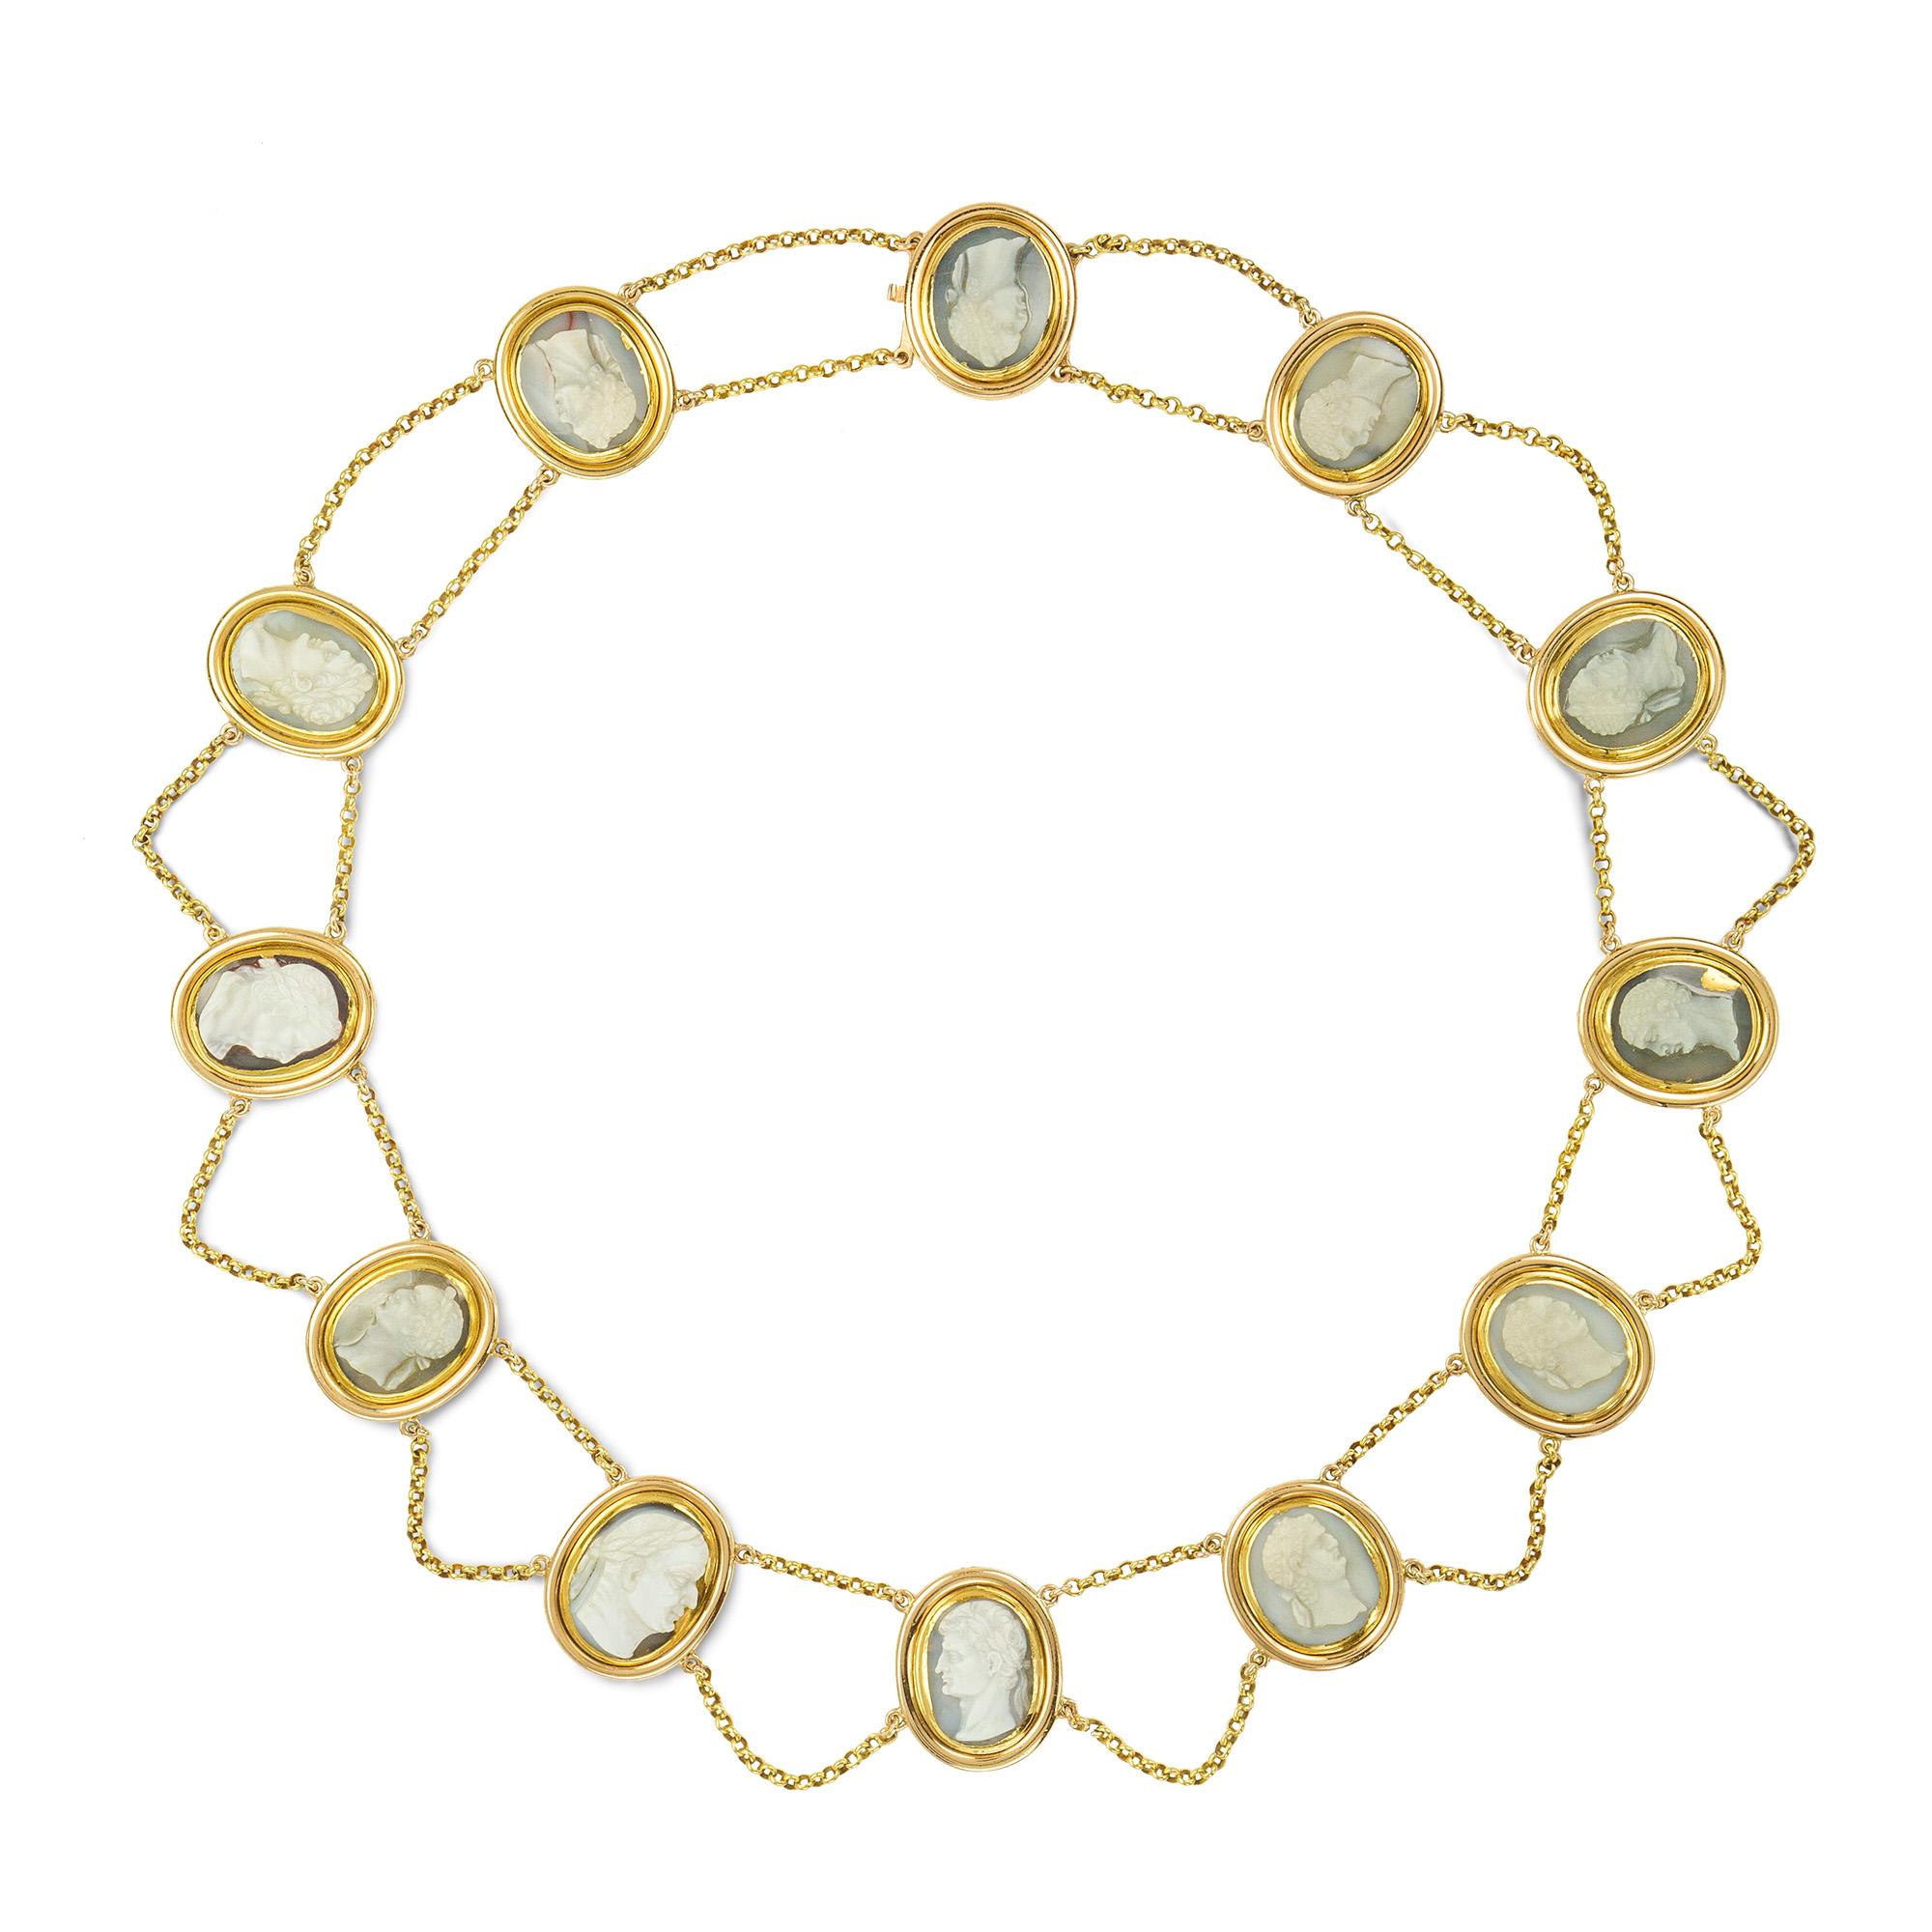 The Emperors Necklace, an early Victorian hardstone cameo necklace, the twelve oval chalcedony cameo plaques, each carved with the profile of a Roman Emperor, all mounted in close-backed yellow gold rub-over settings, each with the name of the